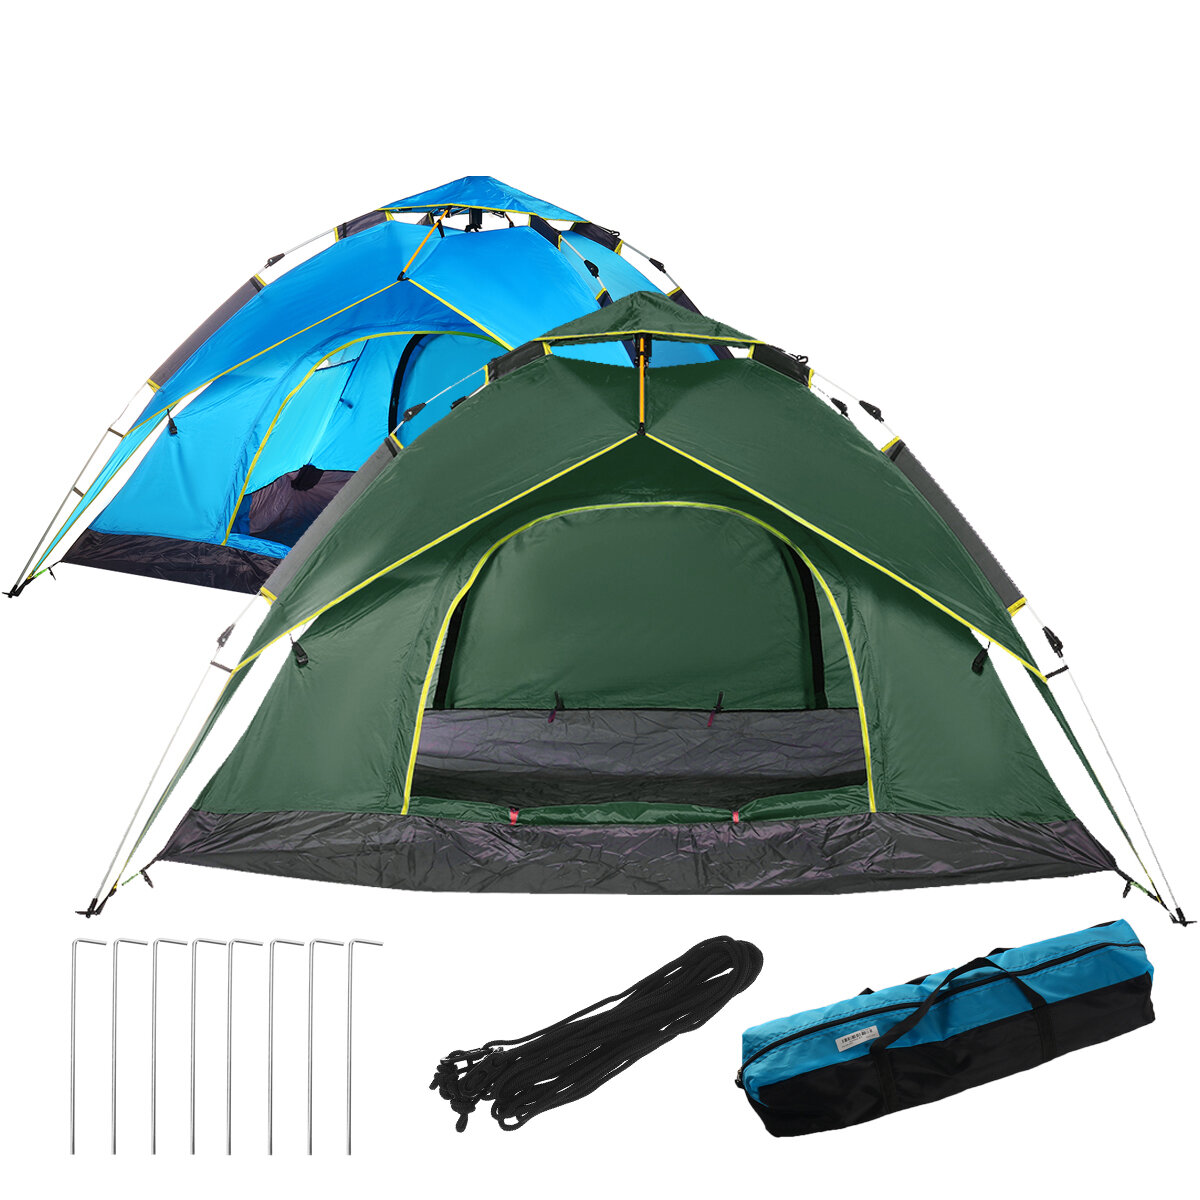 3-4 People Family Camping Tent Automatic Instant Sunshade Waterproof Awning Hiking Travel Fishing